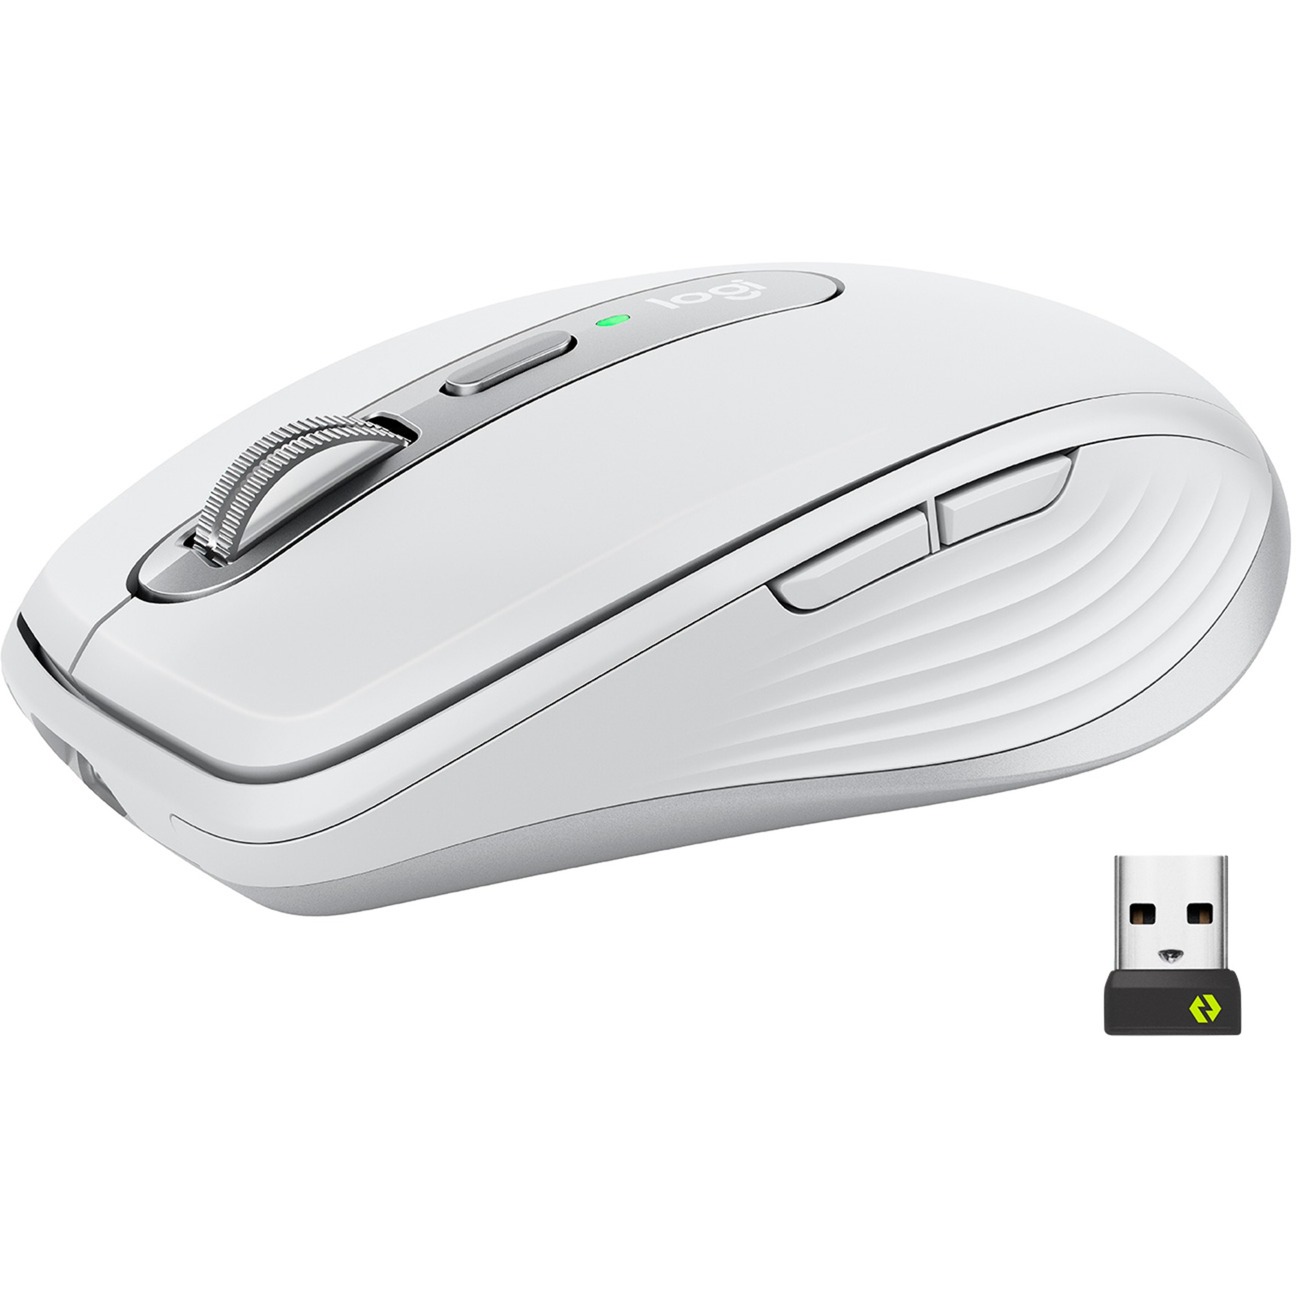 MX Anywhere 3 for Business, Maus von Logitech